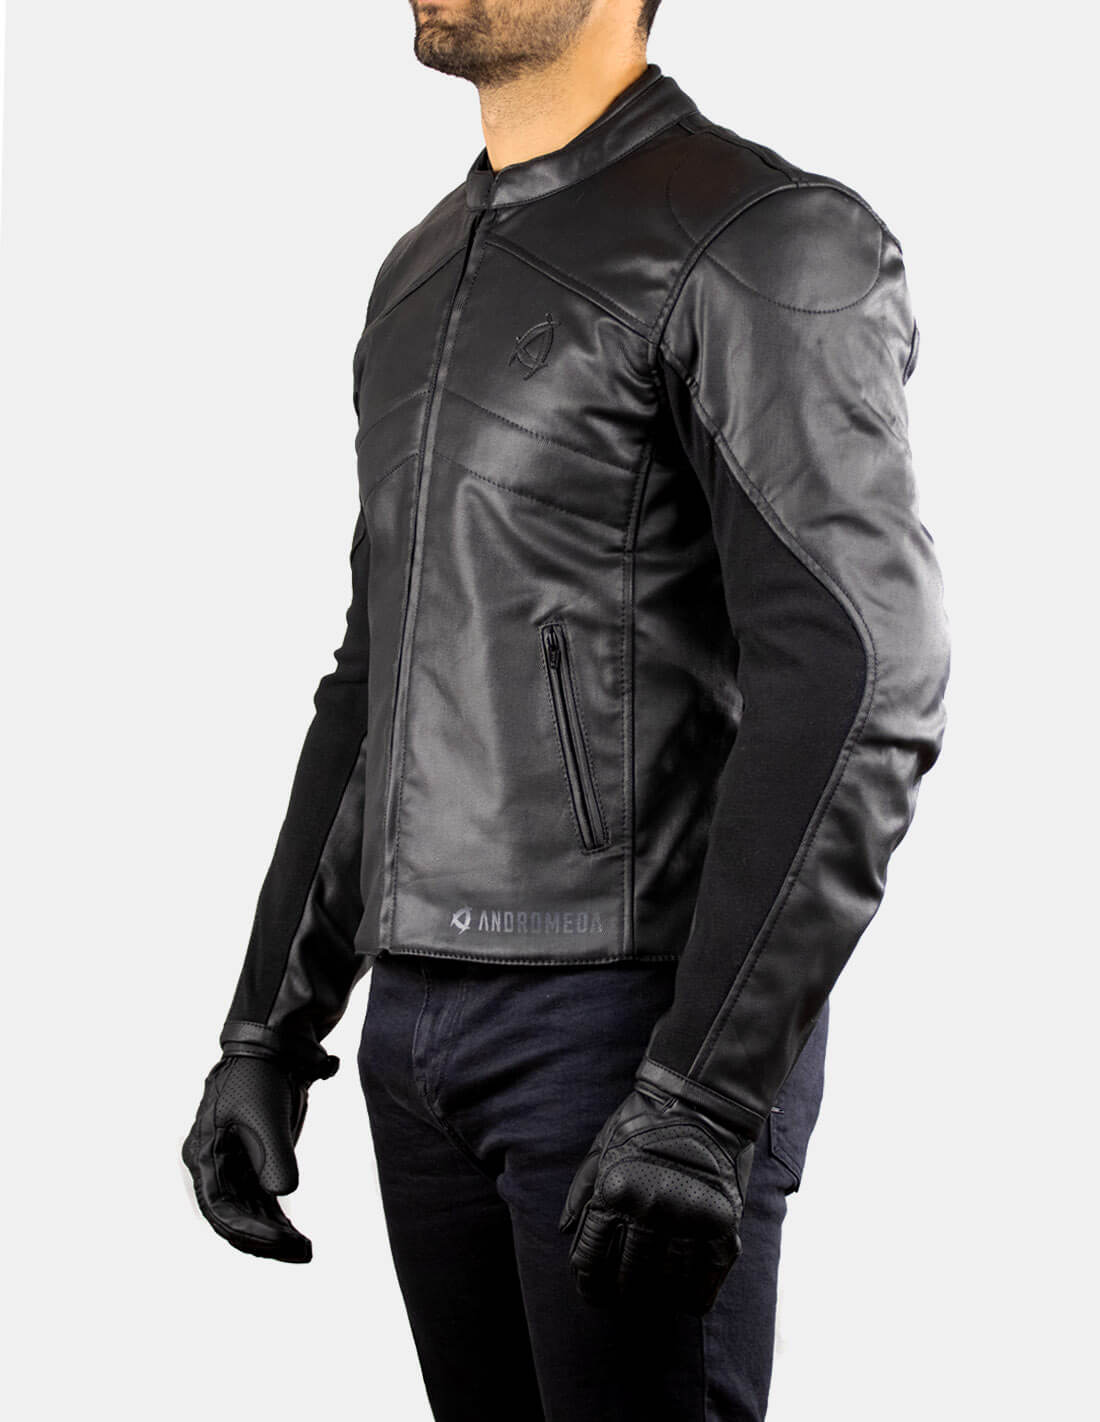 Neowise | Non-leather motorcycle jacket. Cafe racer with armor